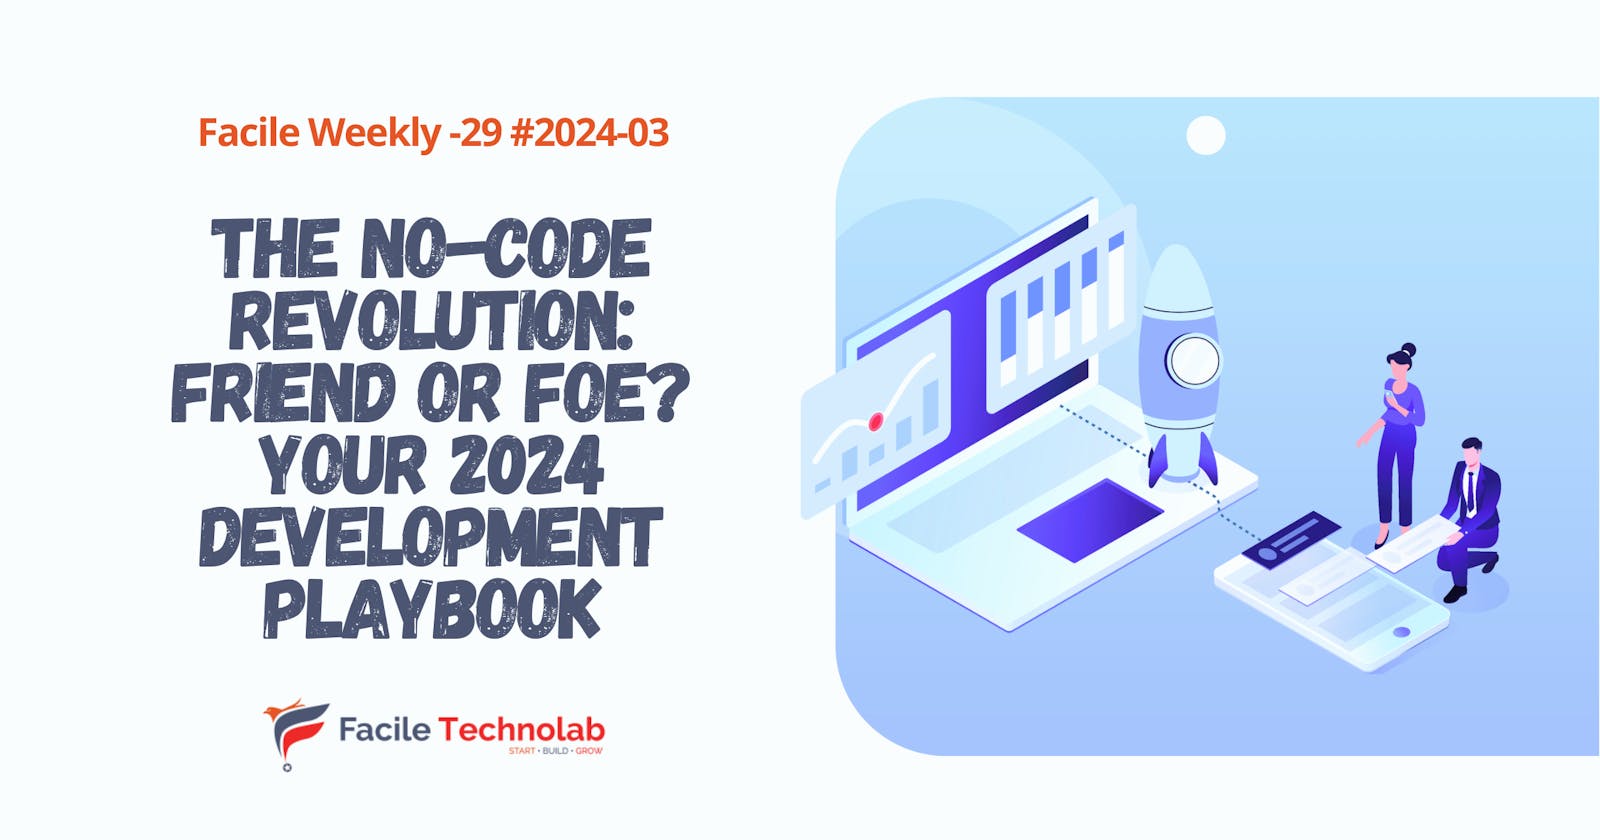 The No-Code Revolution: Friend or Foe? Your 2024 Development Playbook